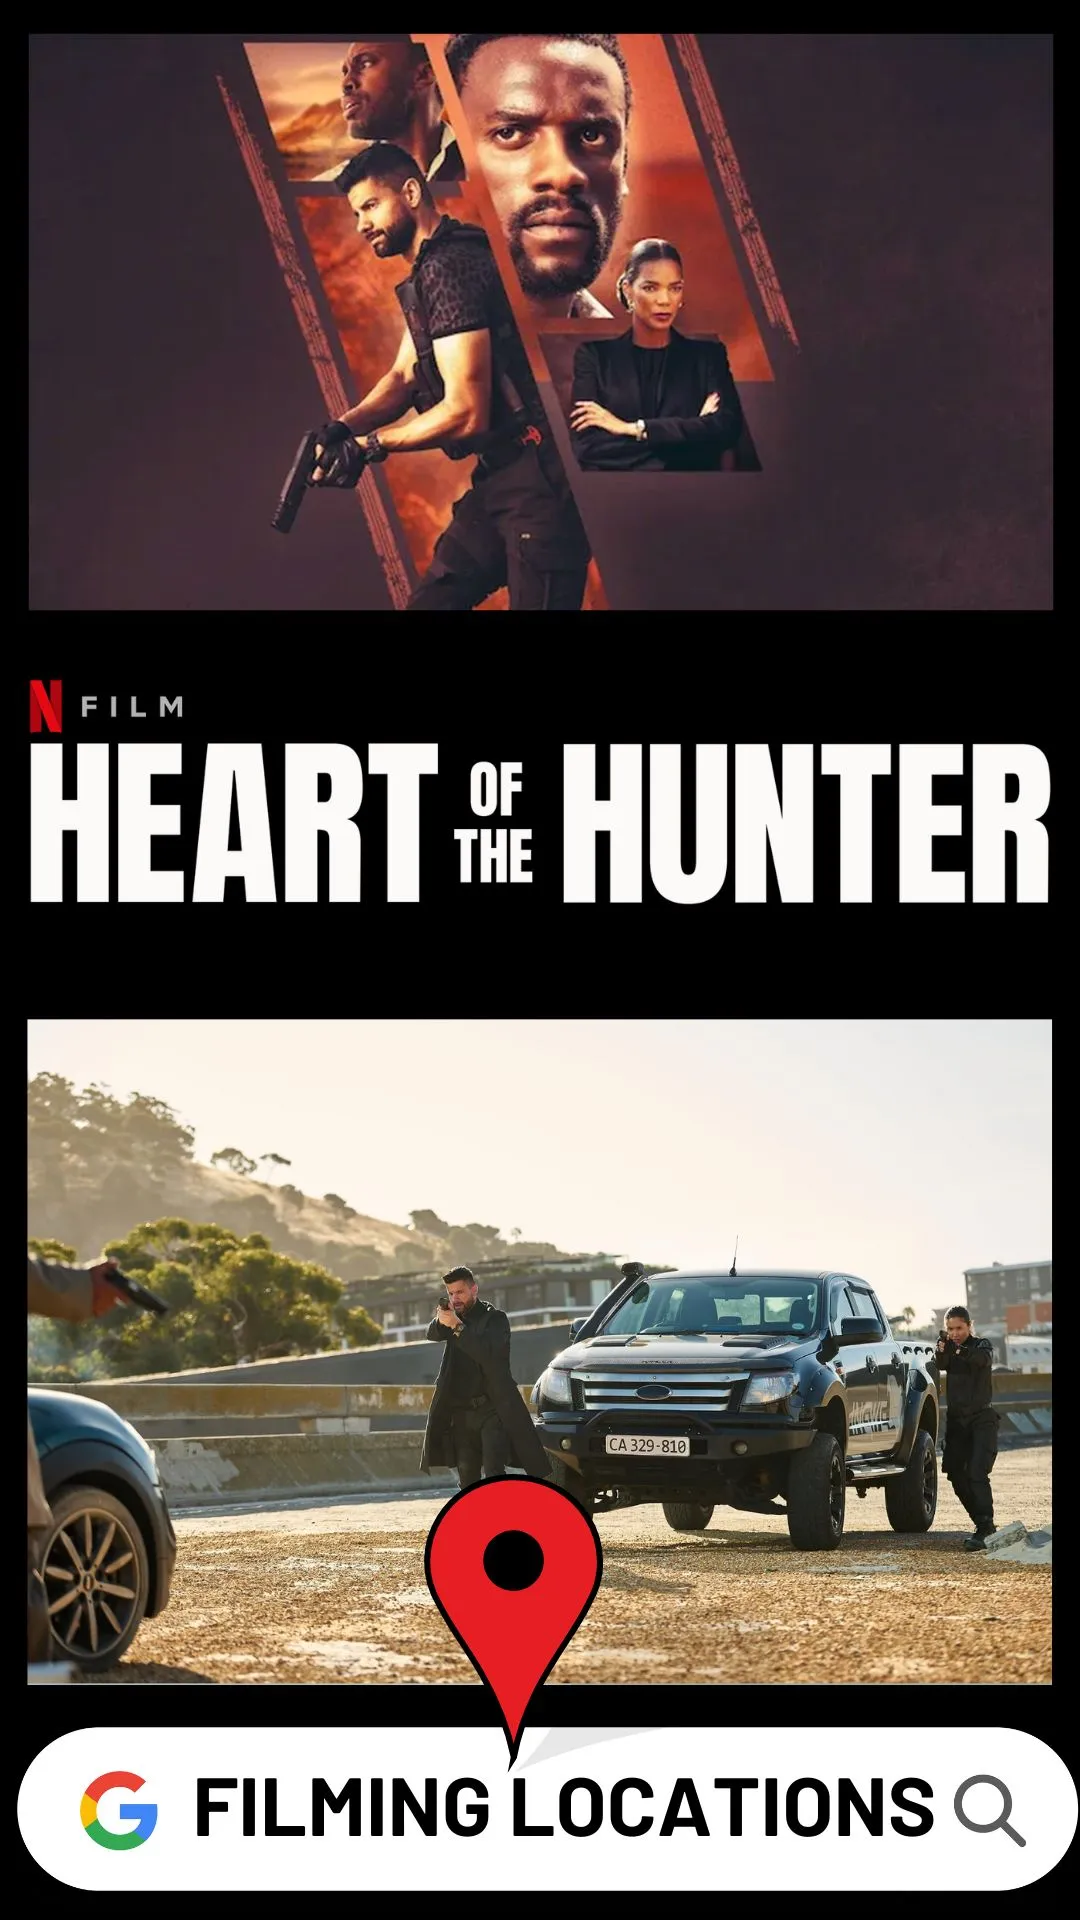 Behind the Scenes of 'Heart of the Hunter' Filmed in Breathtaking Locations